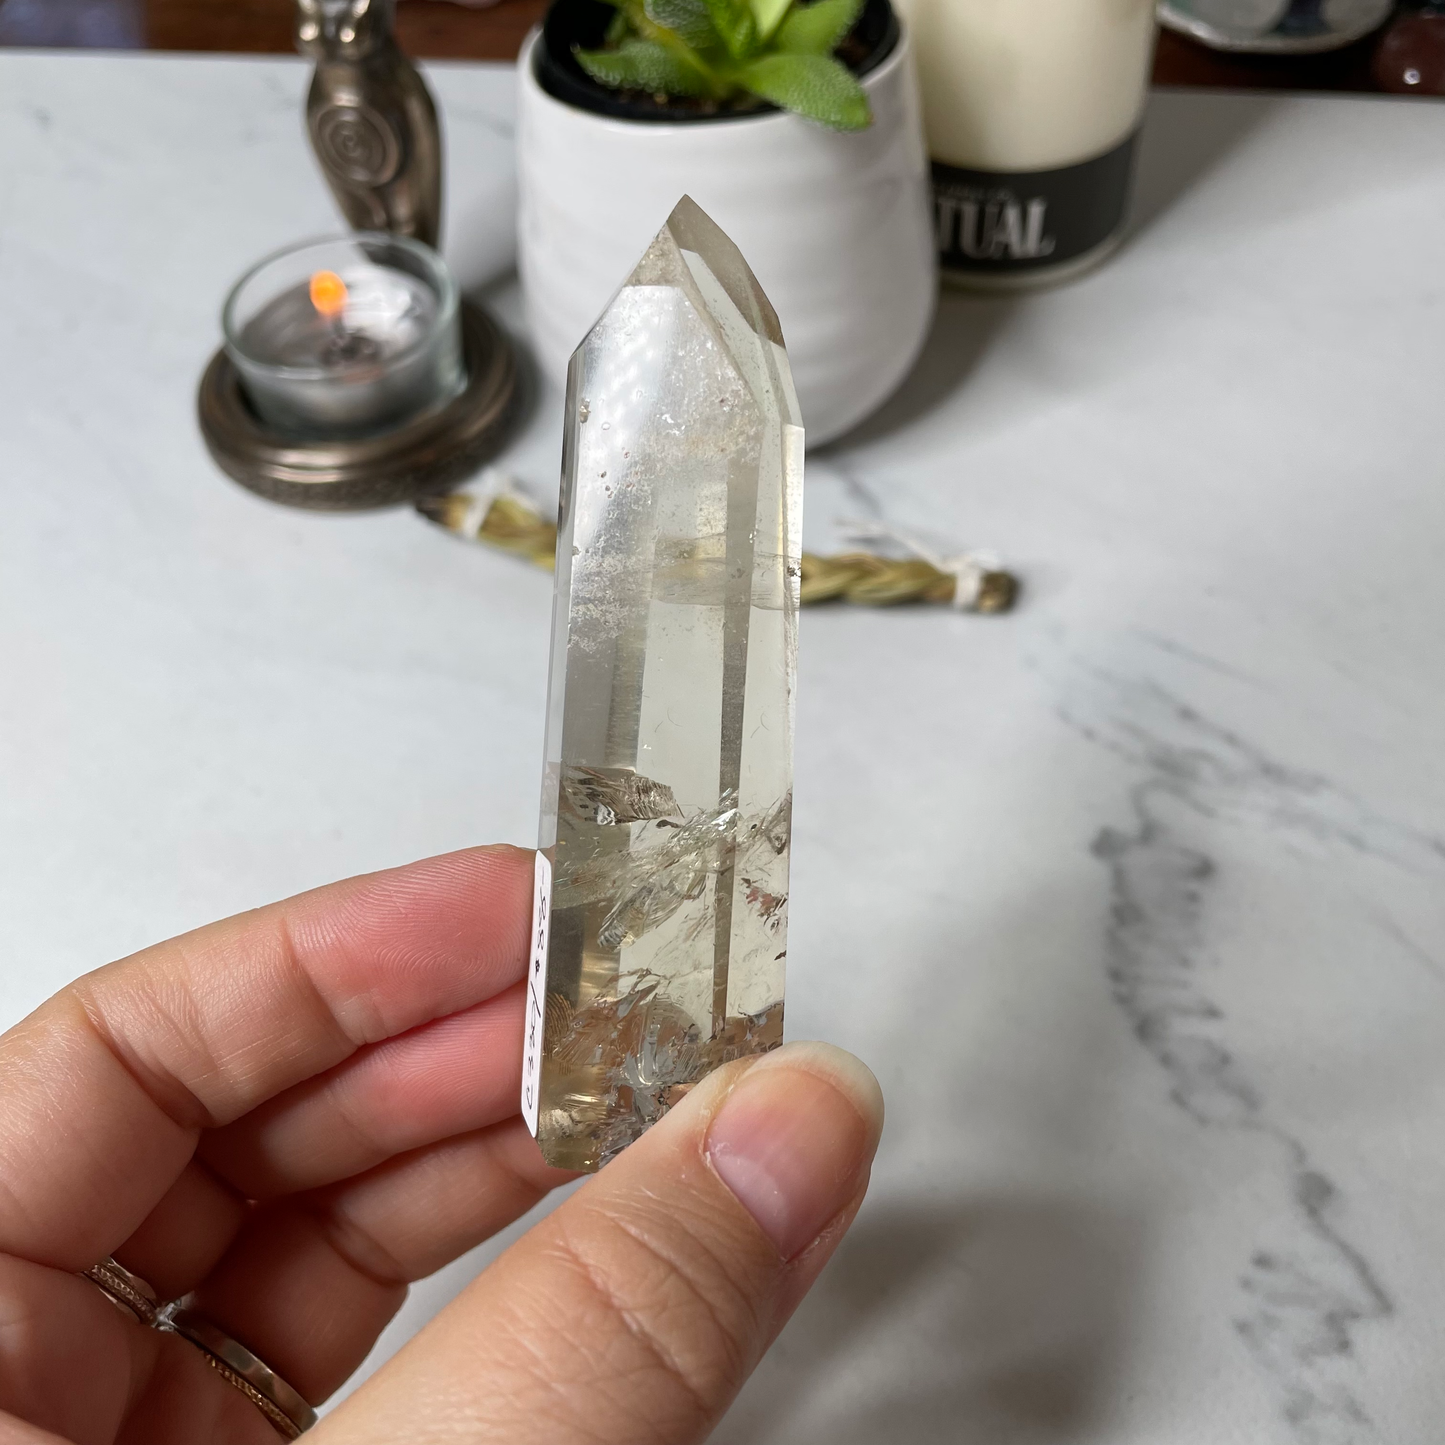 Freya's Haven | Metaphysical & Crystal shop | A close up photo of a Citrine Phantom tower held in a woman's hand with candles in the background.